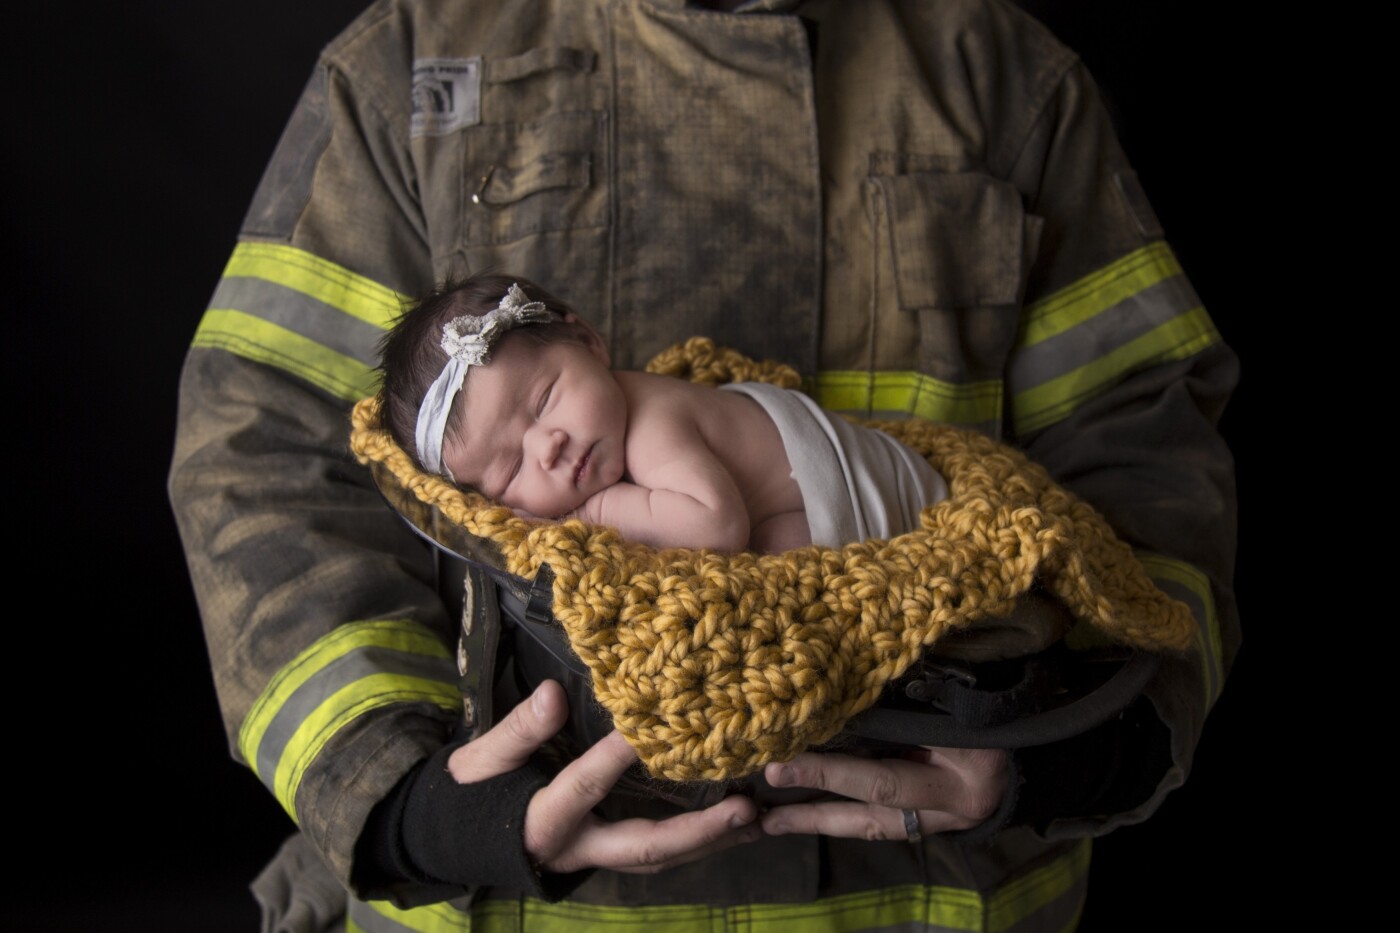 Mom and dad met while working for the same fire company. They caught each others' eye and started going out. Now, they are married and this is their second baby and first girl, daddy's little girl.